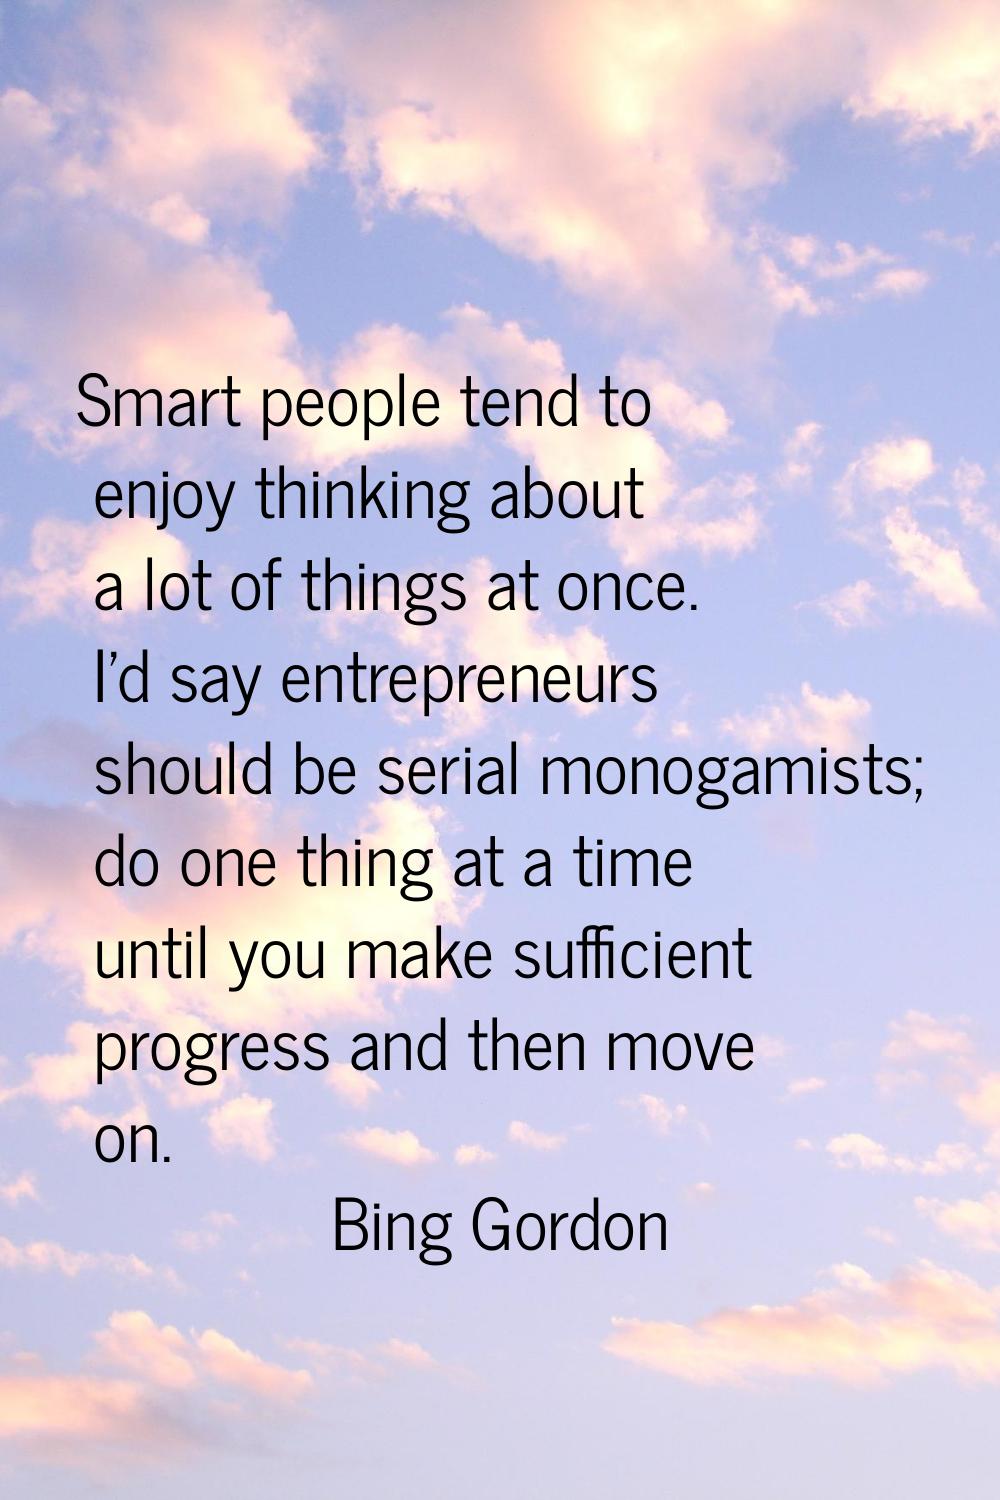 Smart people tend to enjoy thinking about a lot of things at once. I'd say entrepreneurs should be 